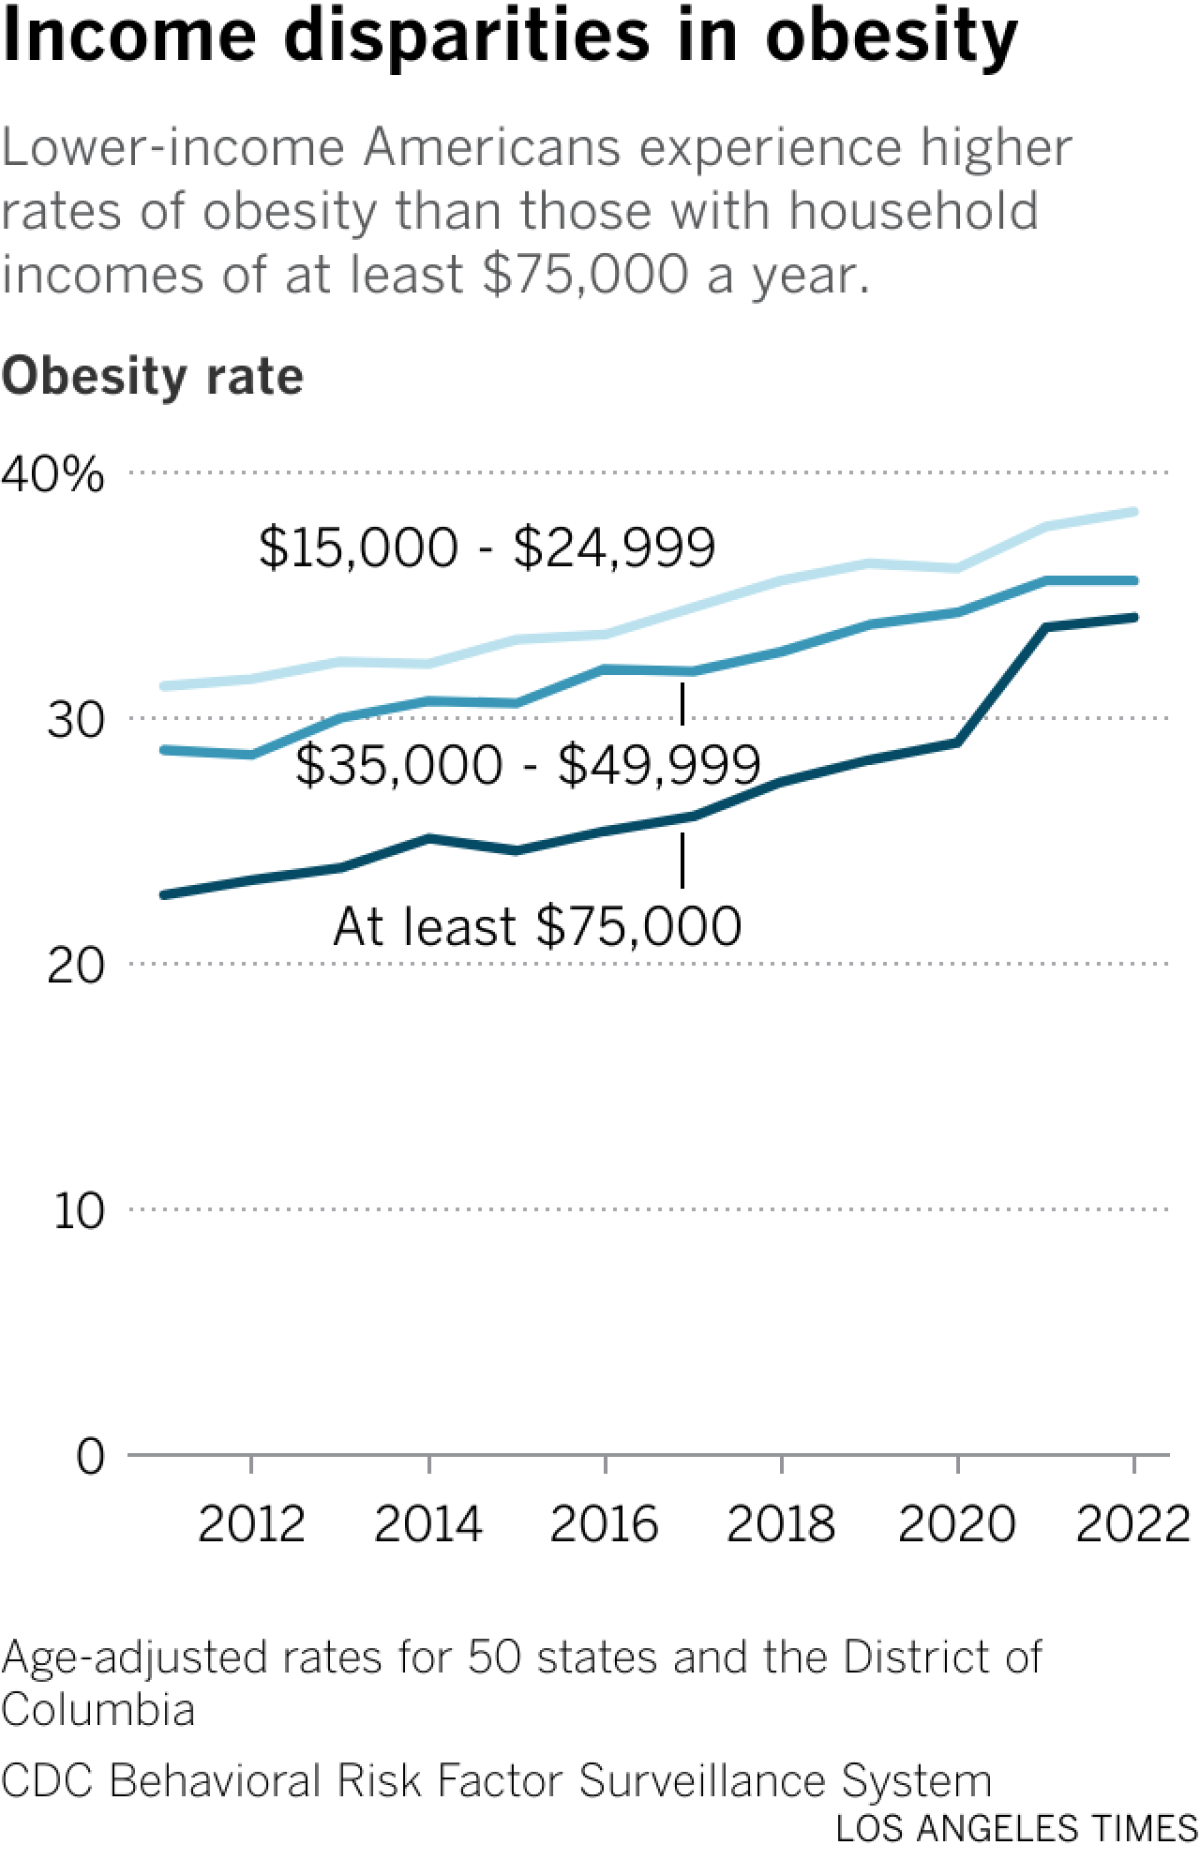 The line graph shows obesity rates among three income categories: between $15,000 and $26,000, between $35,000 and $50,000, and at least $75,000.  Rates are highest among the lowest incomes, but increase for all categories.